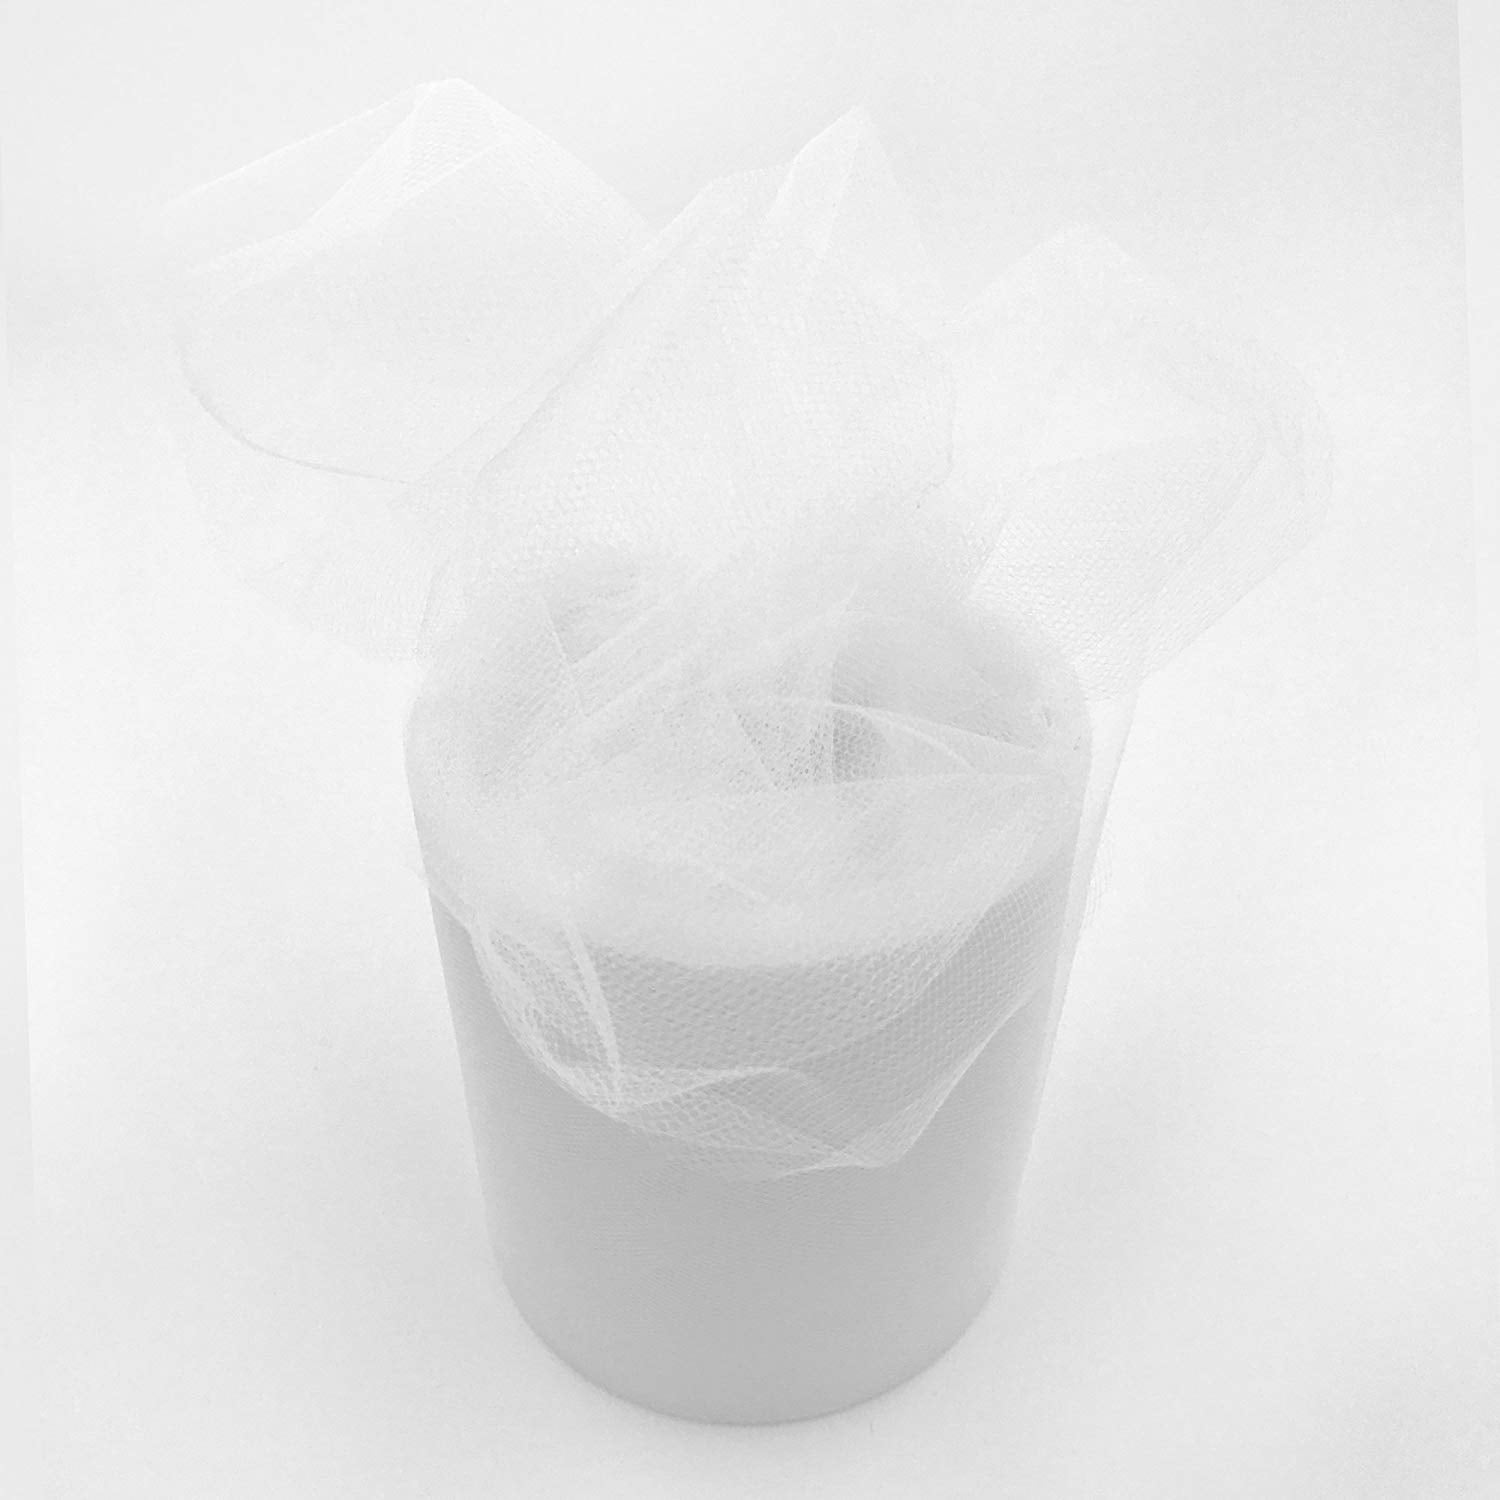 600ft Tulle Ribbon Tulle Fabric Table Skirt Wedding Decorations Gift Wrapping White Tulle Roll 6Inchx200Yards